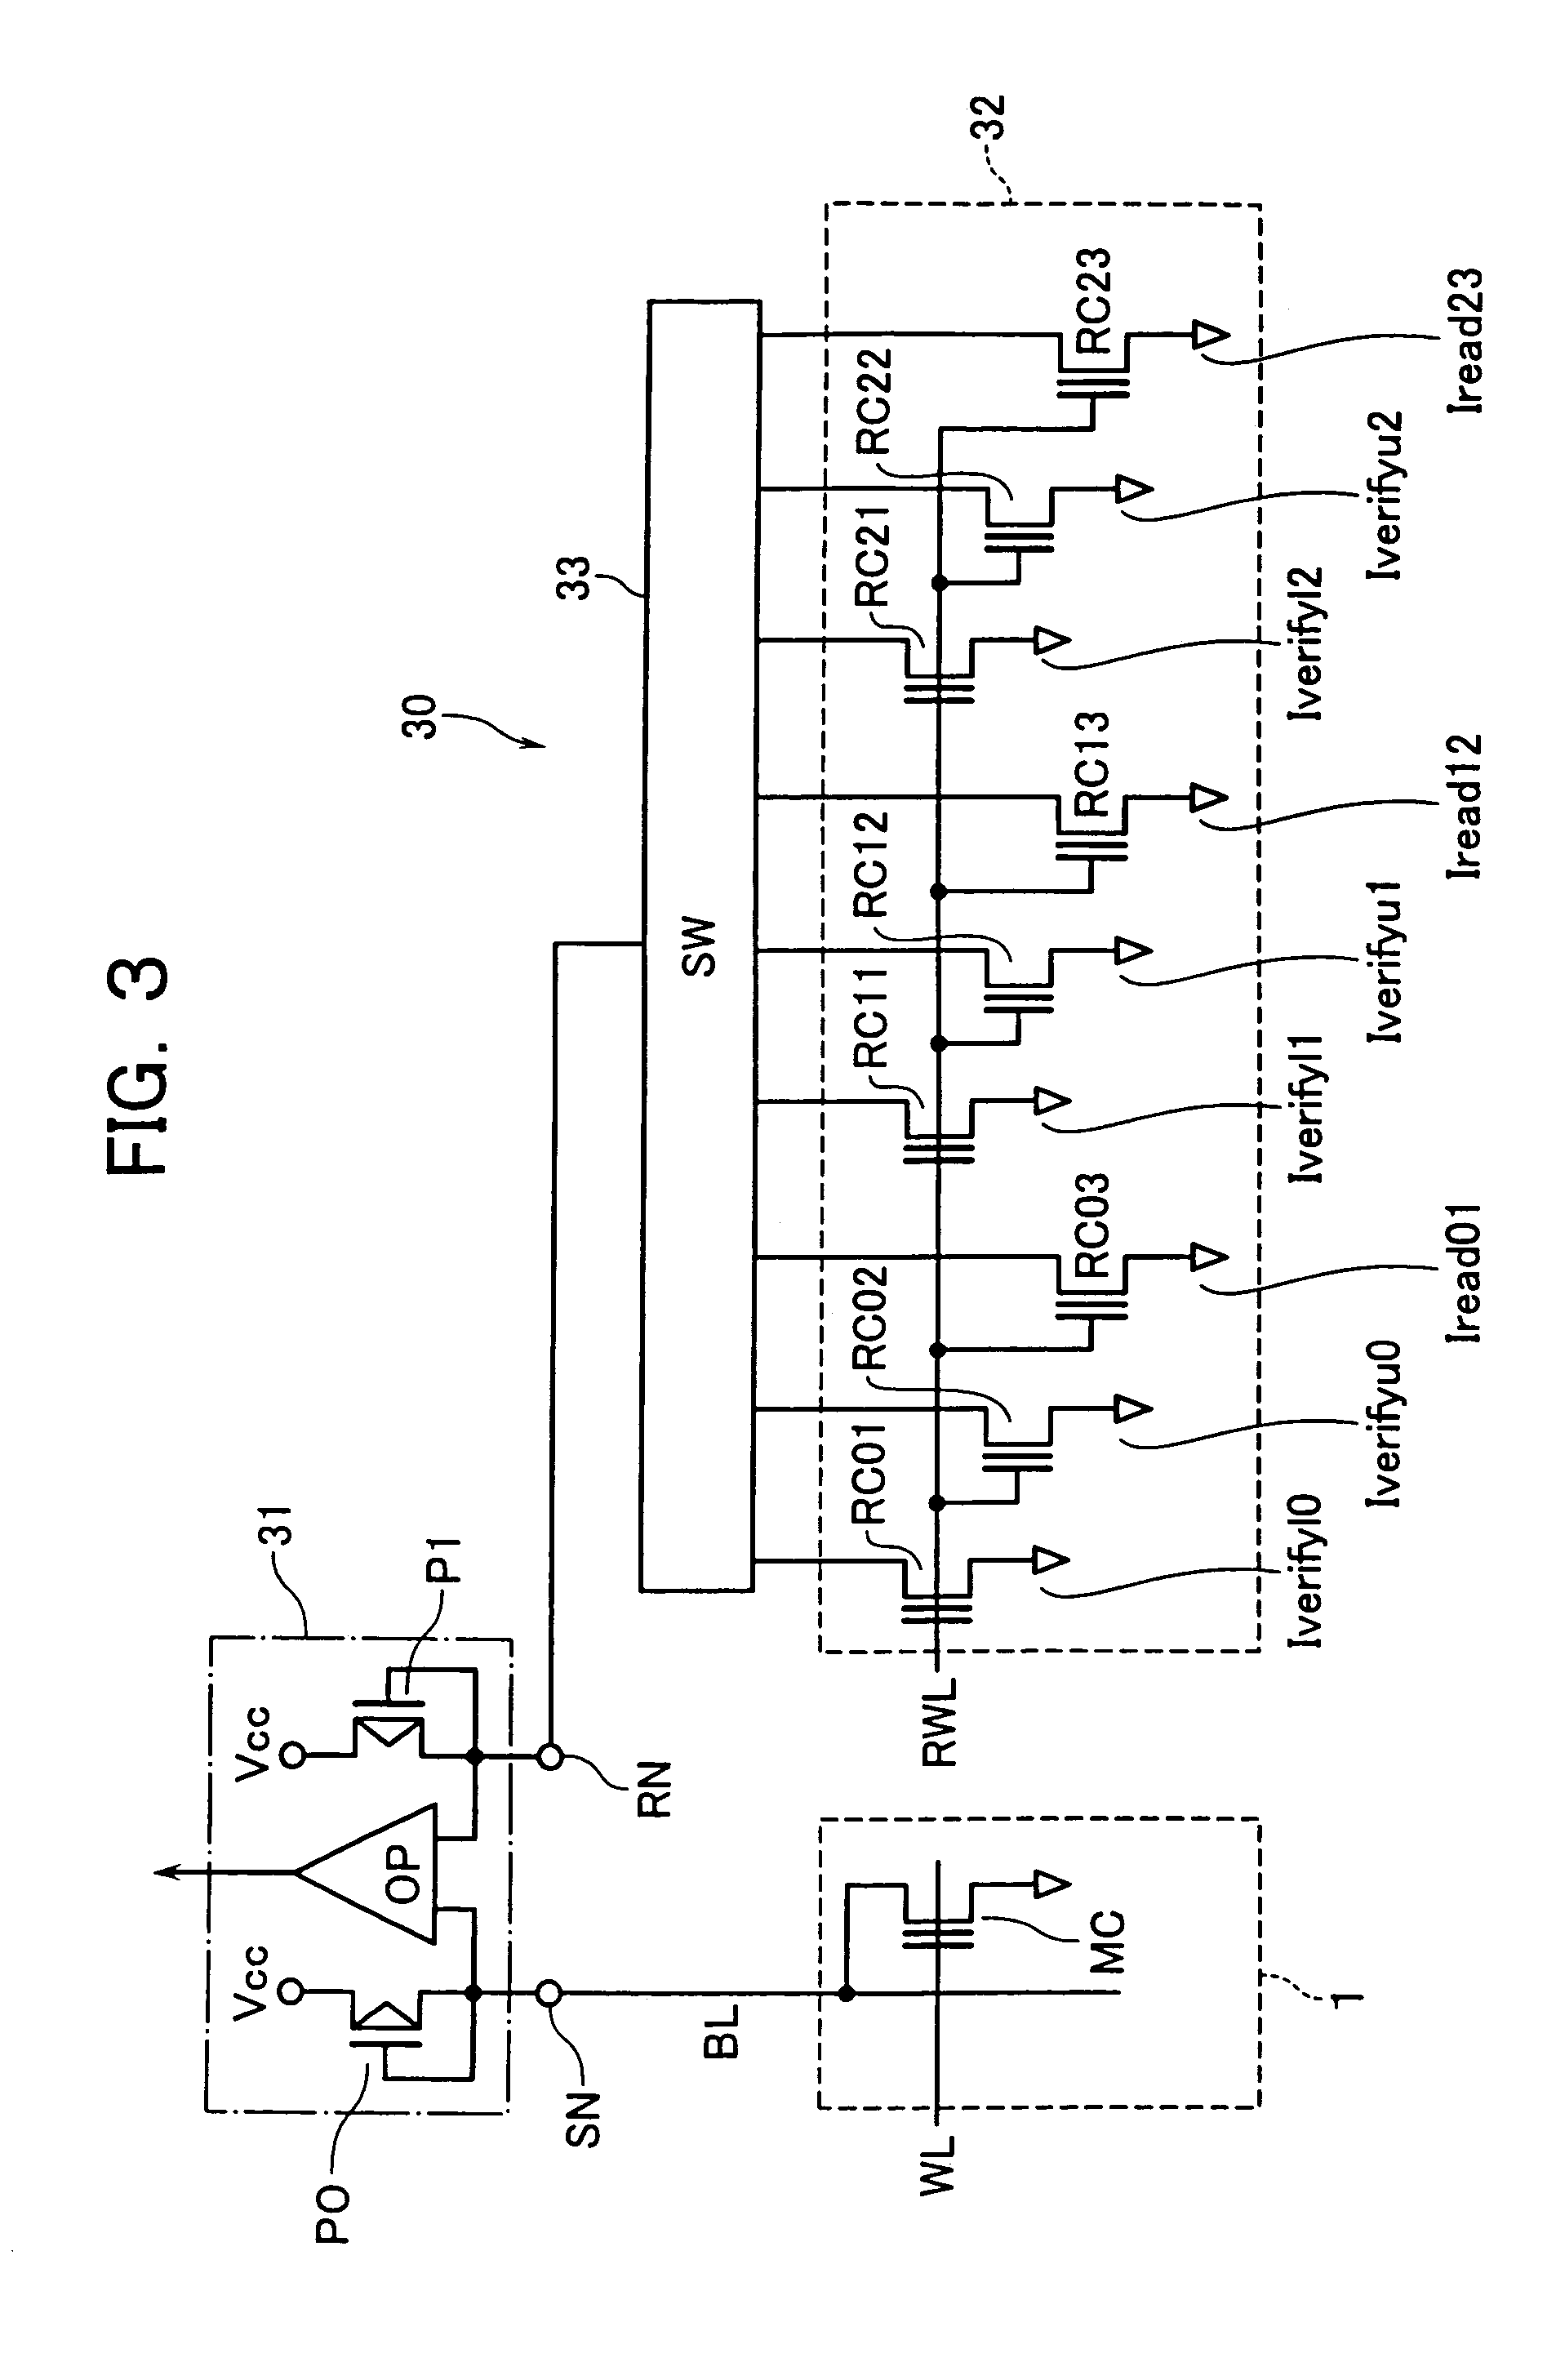 Current difference divider circuit